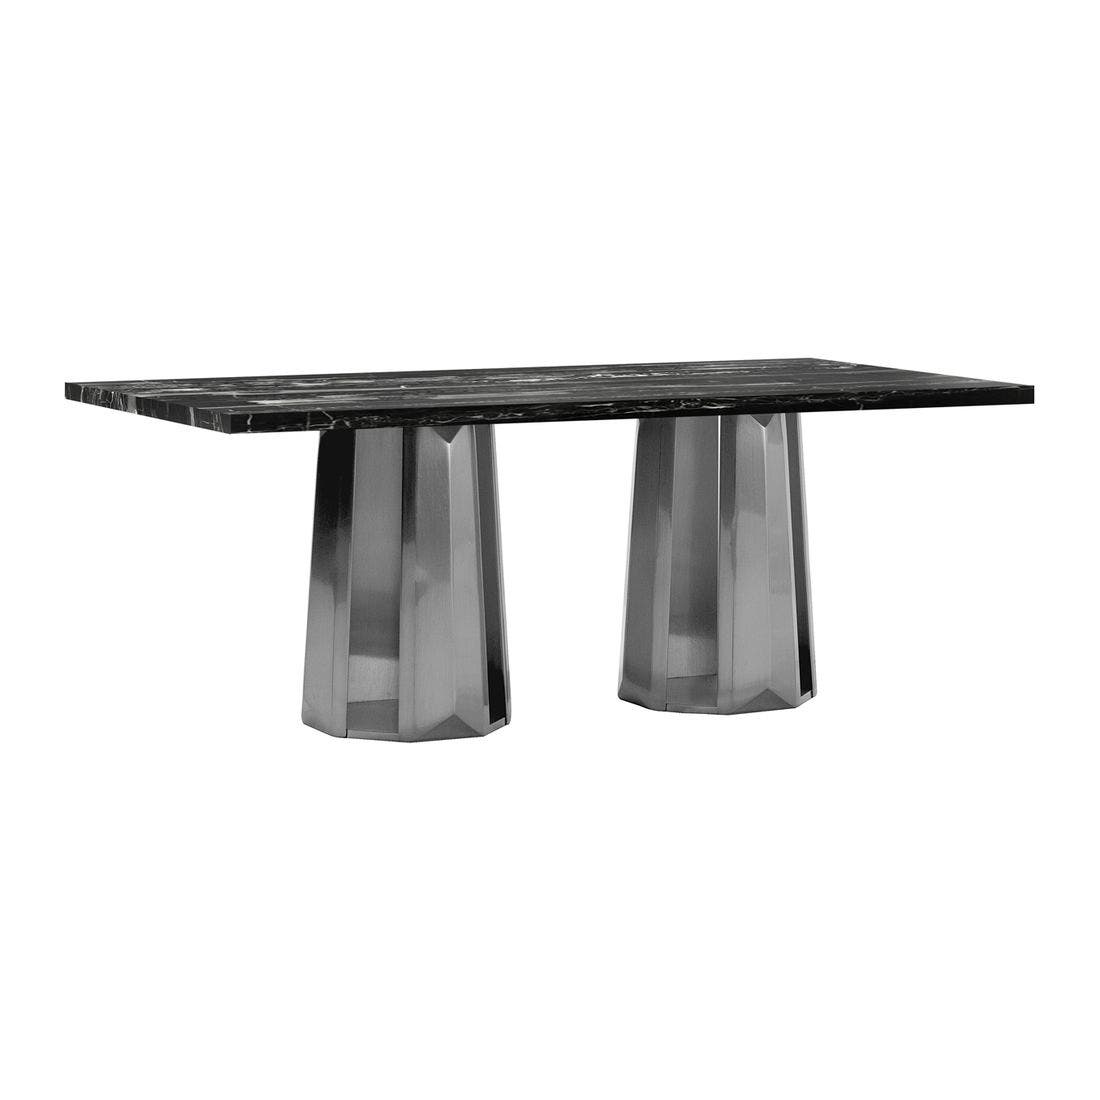 59021663-base-sb07m-furniture-dining-room-dining-tables-01